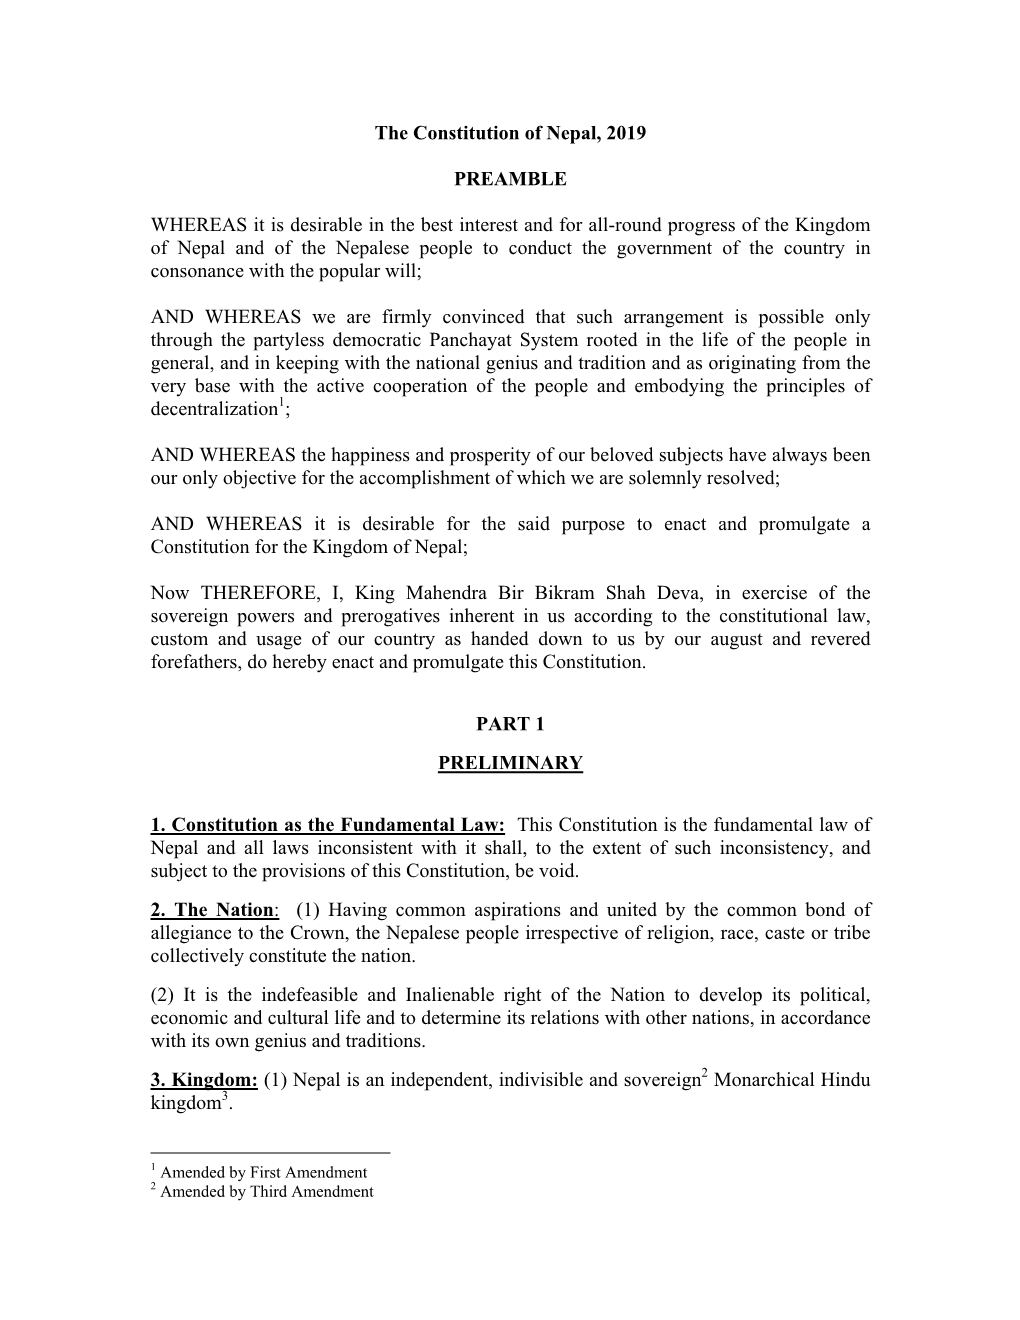 The Constitution of Nepal, 2019 PREAMBLE WHEREAS It Is